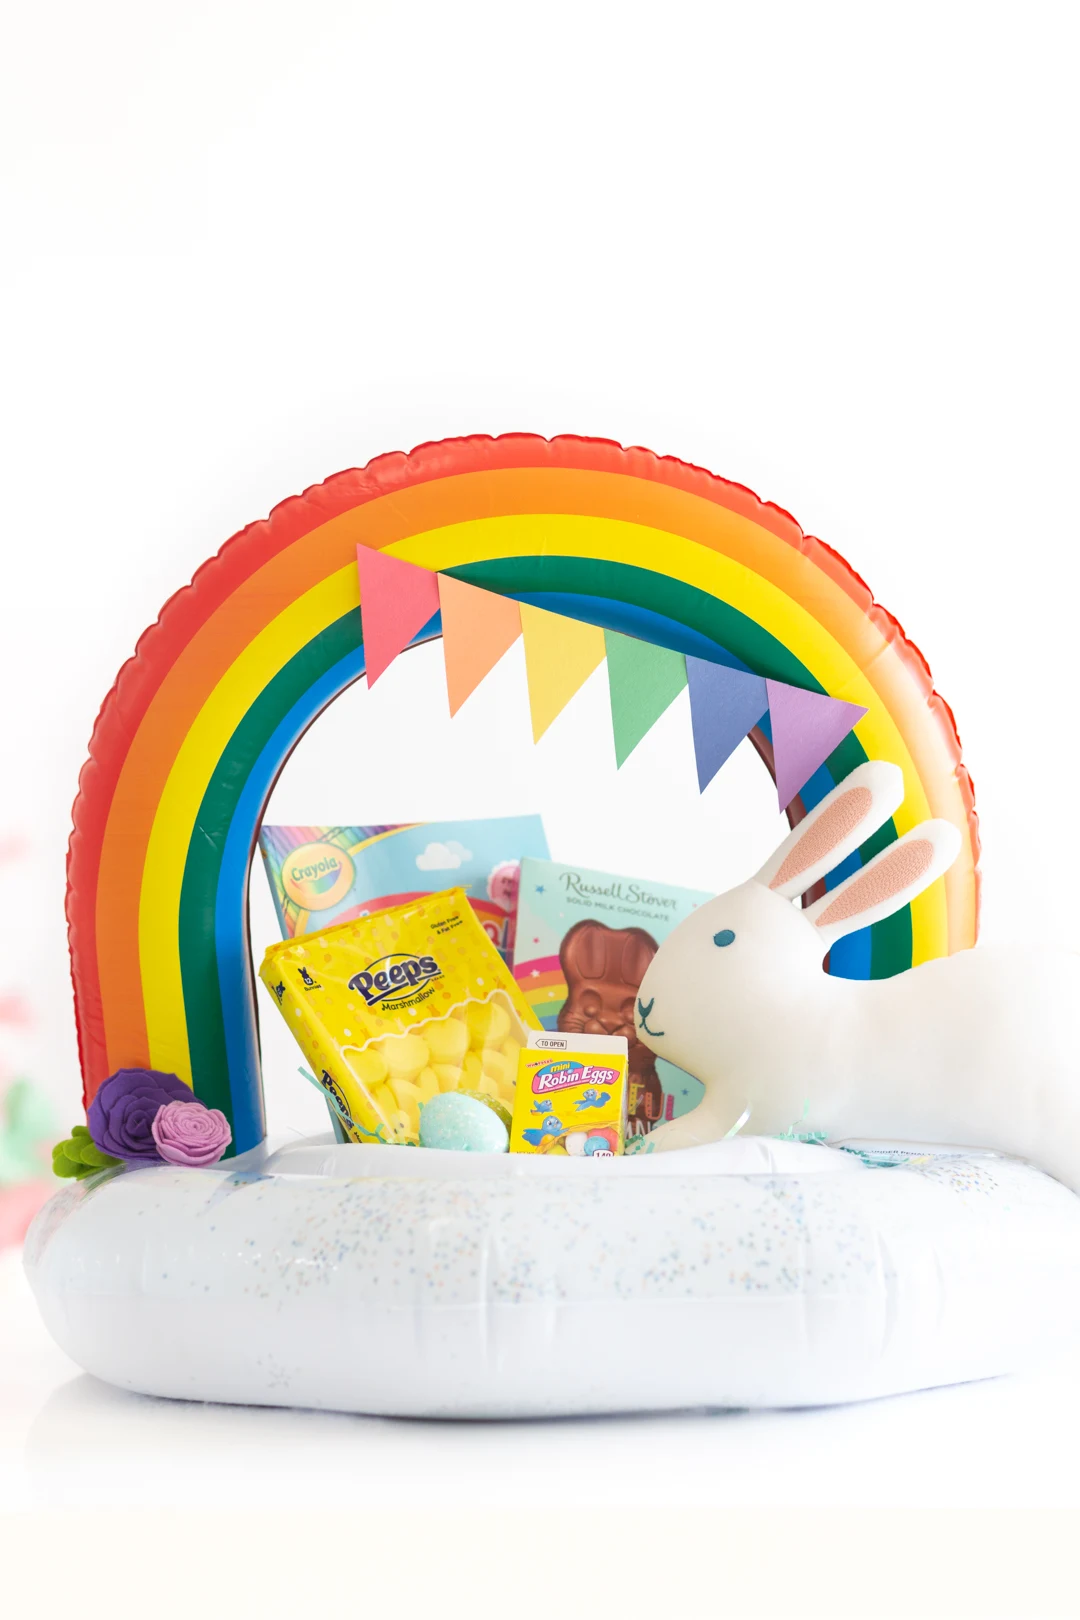 Alternate Easter Basket idea using a pool float. Cute construction paper rainbow to decorate.